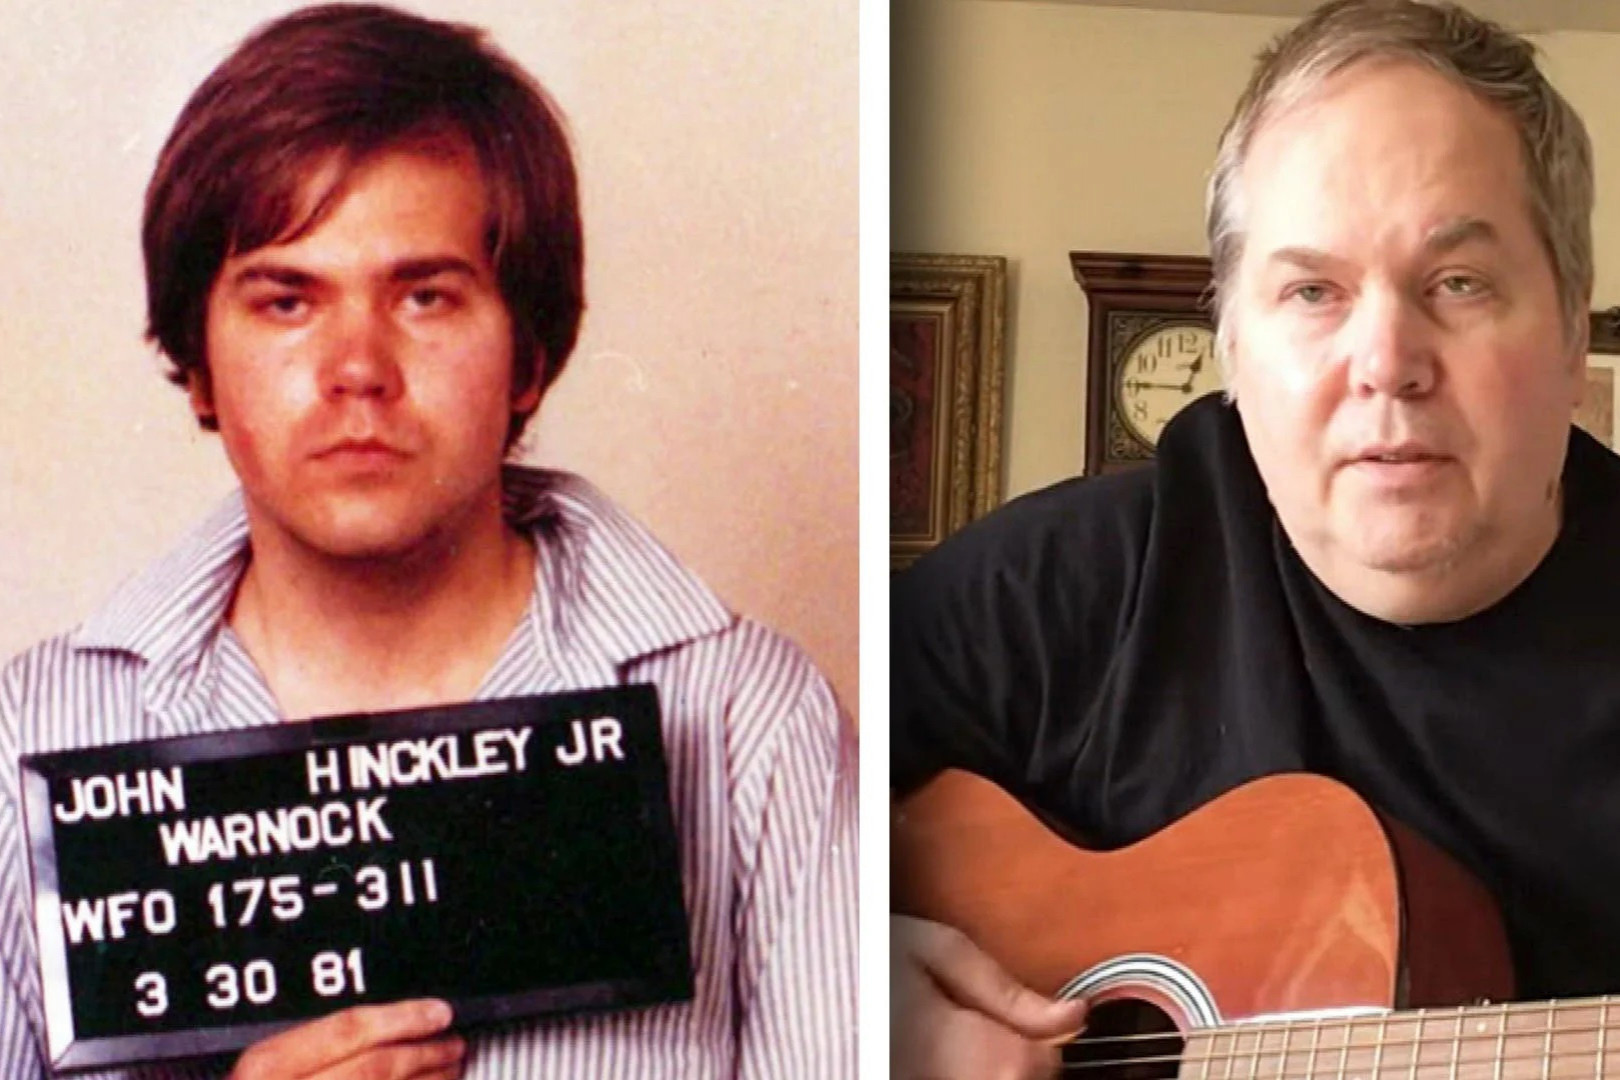 YOU can be in John Hinckley Jr's band